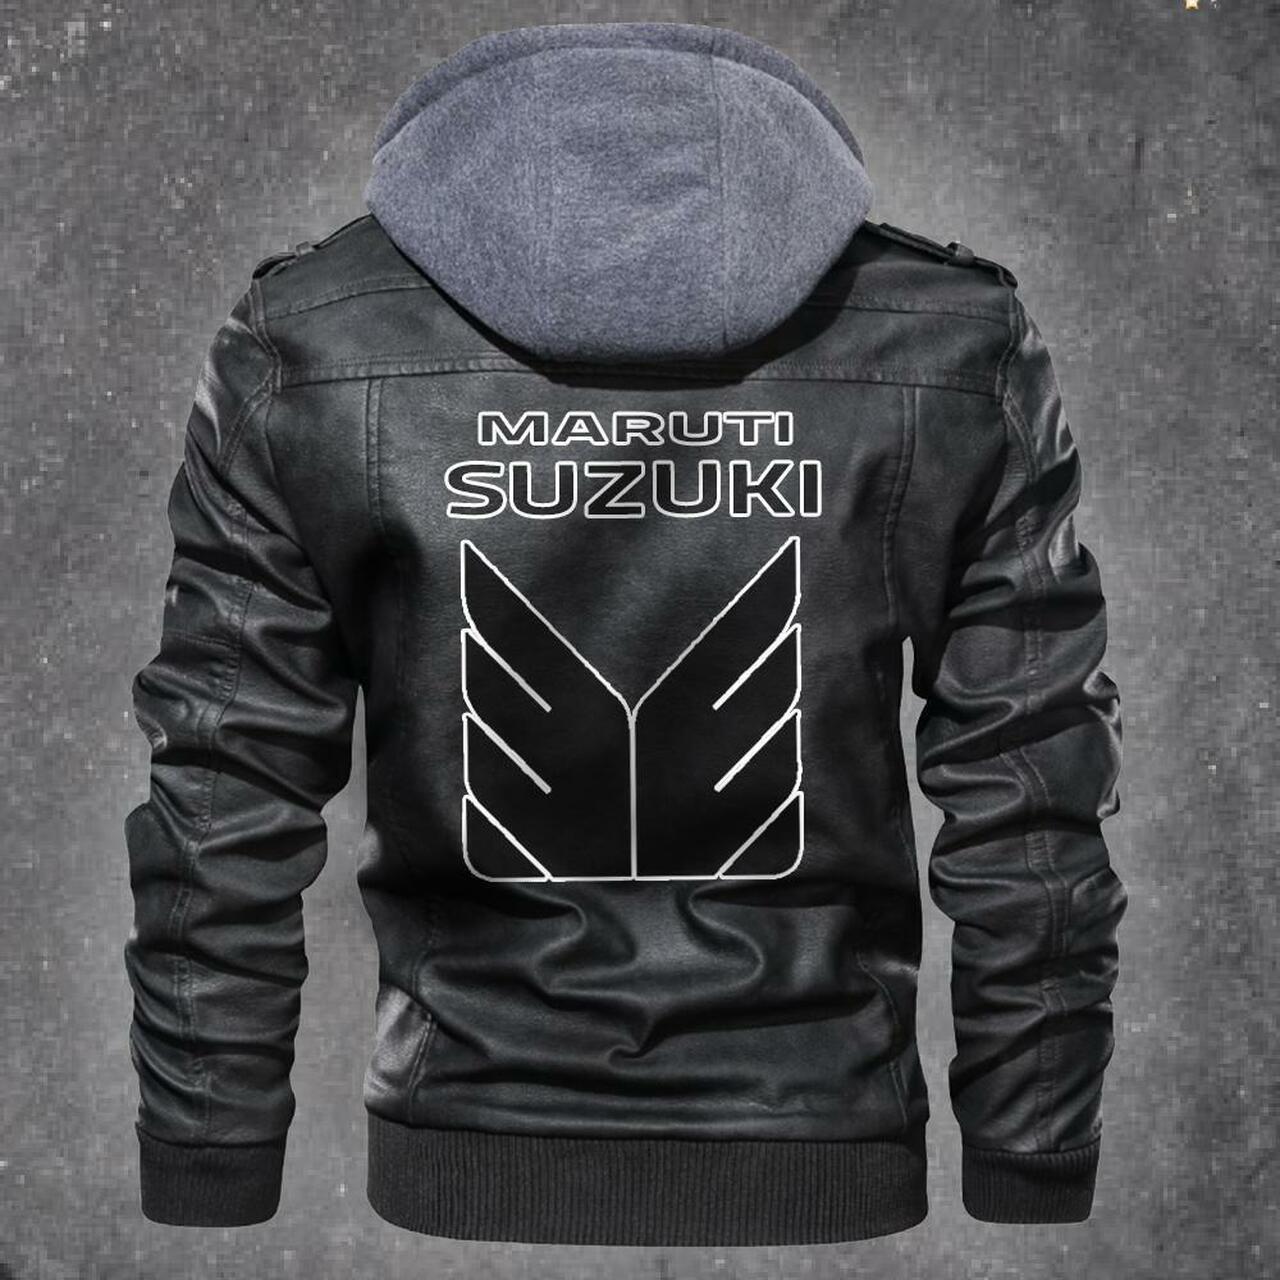 You'll have the perfect jacket in no time by clicking the link below 525